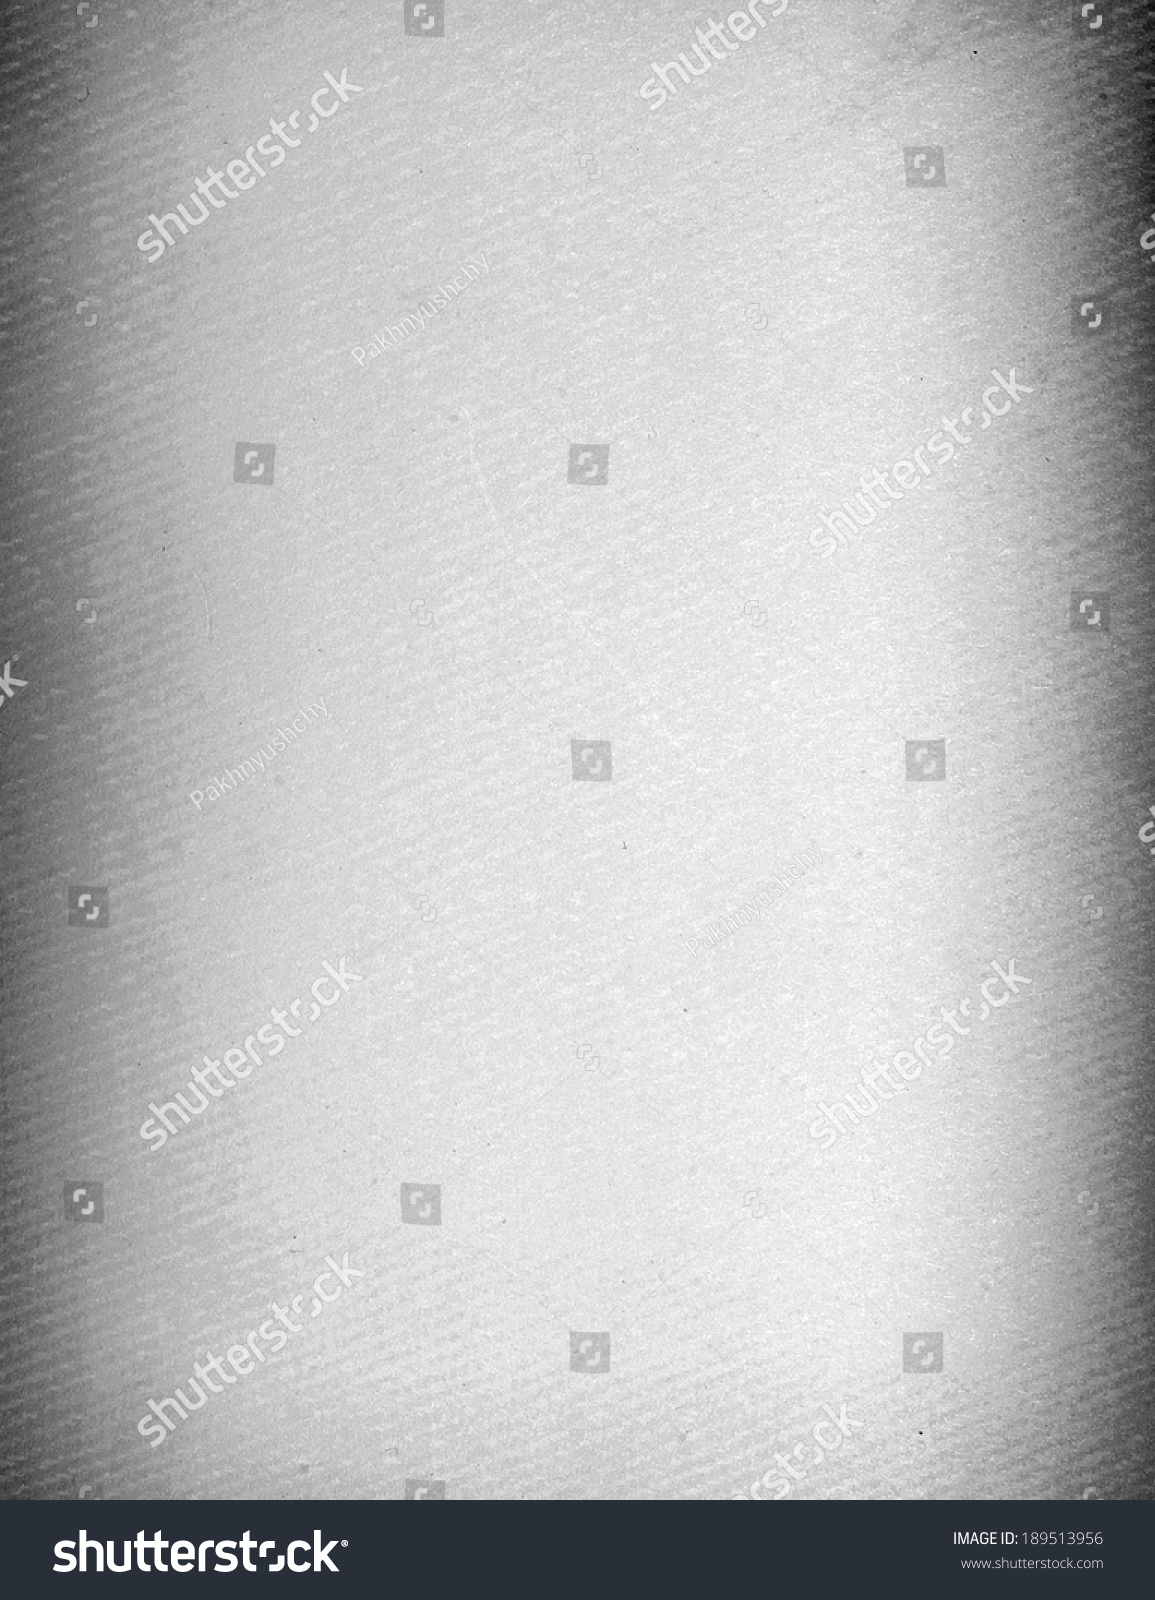 grunge paper background with space for text or image #189513956